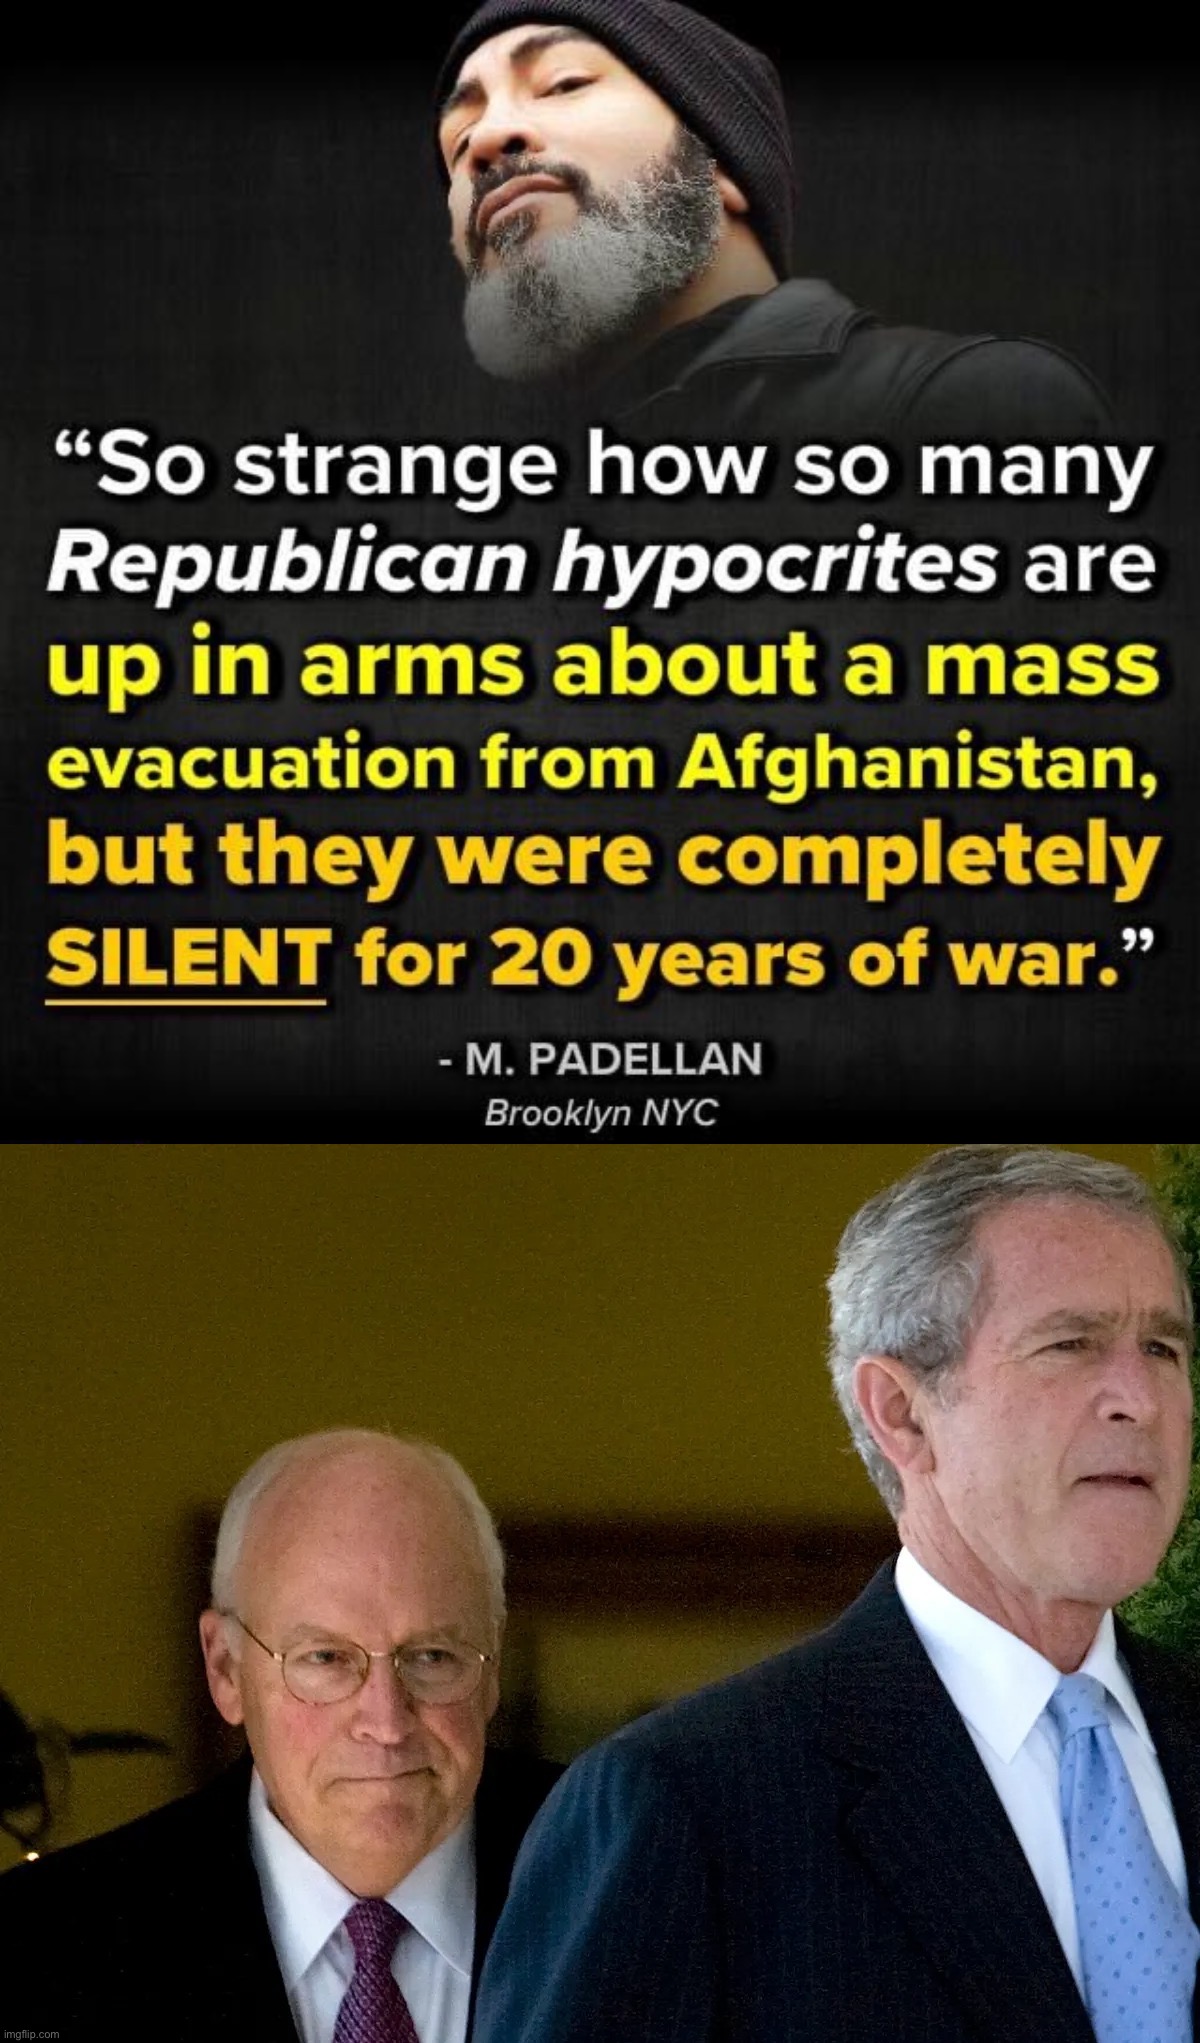 Yes, the past few days have been a disaster. And the past 20 years? | image tagged in republican hypocrites afghanistan,dick cheney george w bush | made w/ Imgflip meme maker